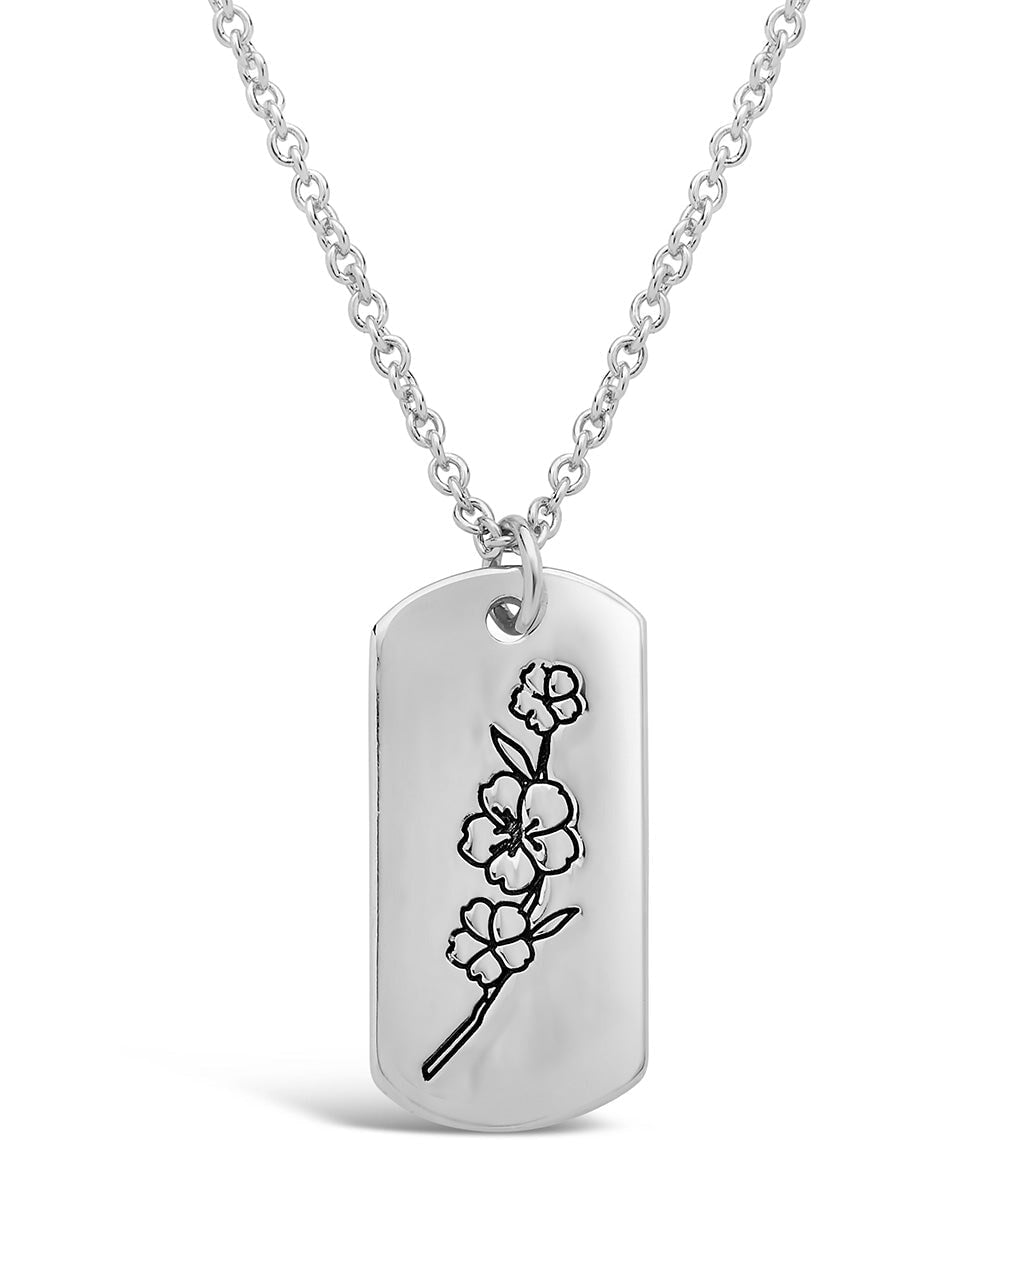 Birth Flower Pendant Necklace Sterling Forever Silver March / Cherry Blossom 